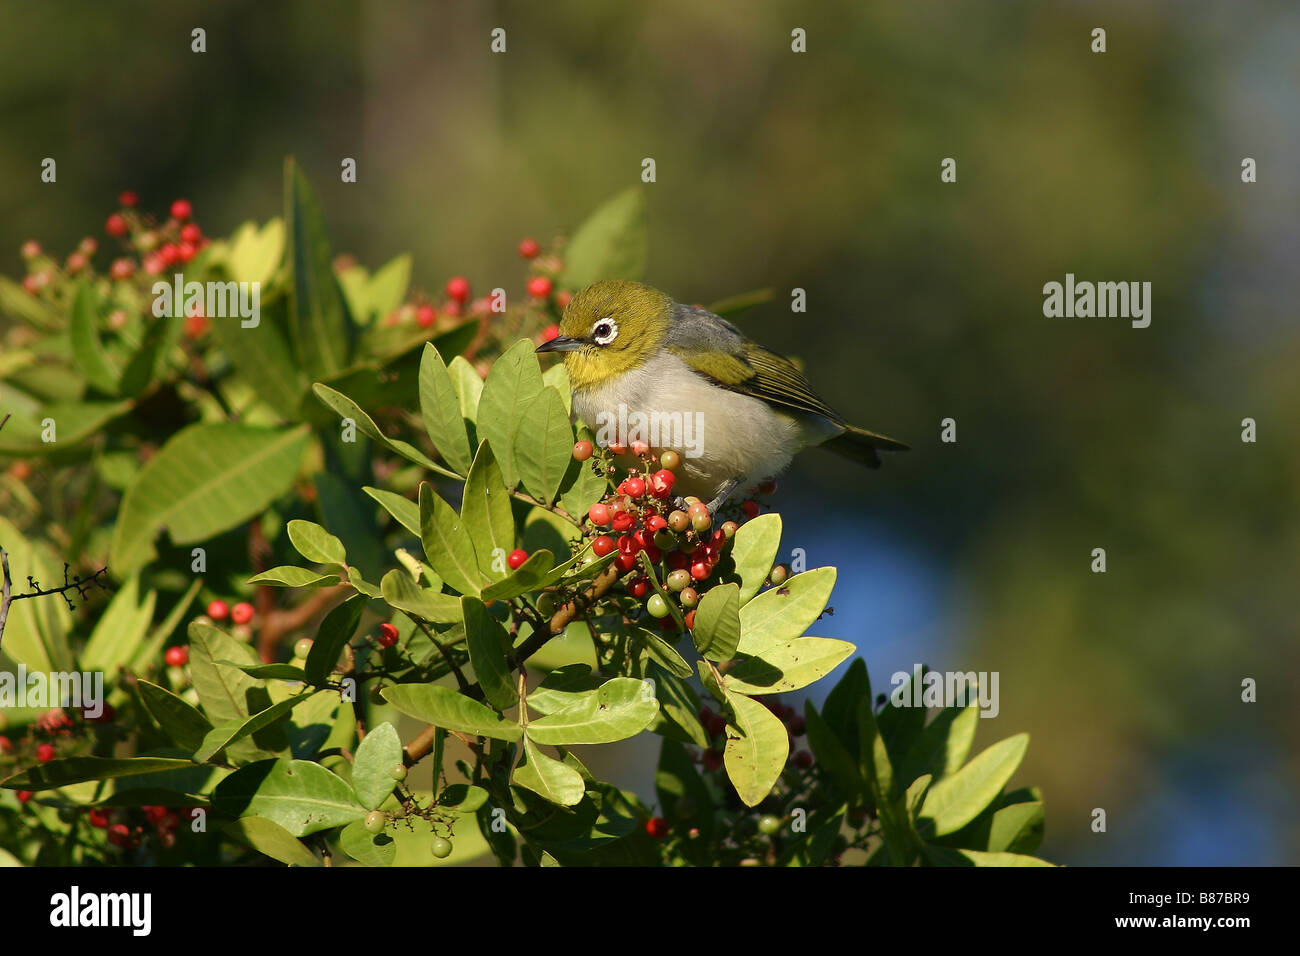 A Silverye feeds on the introduced weed, Broadleaved Pepper tree Stock Photo